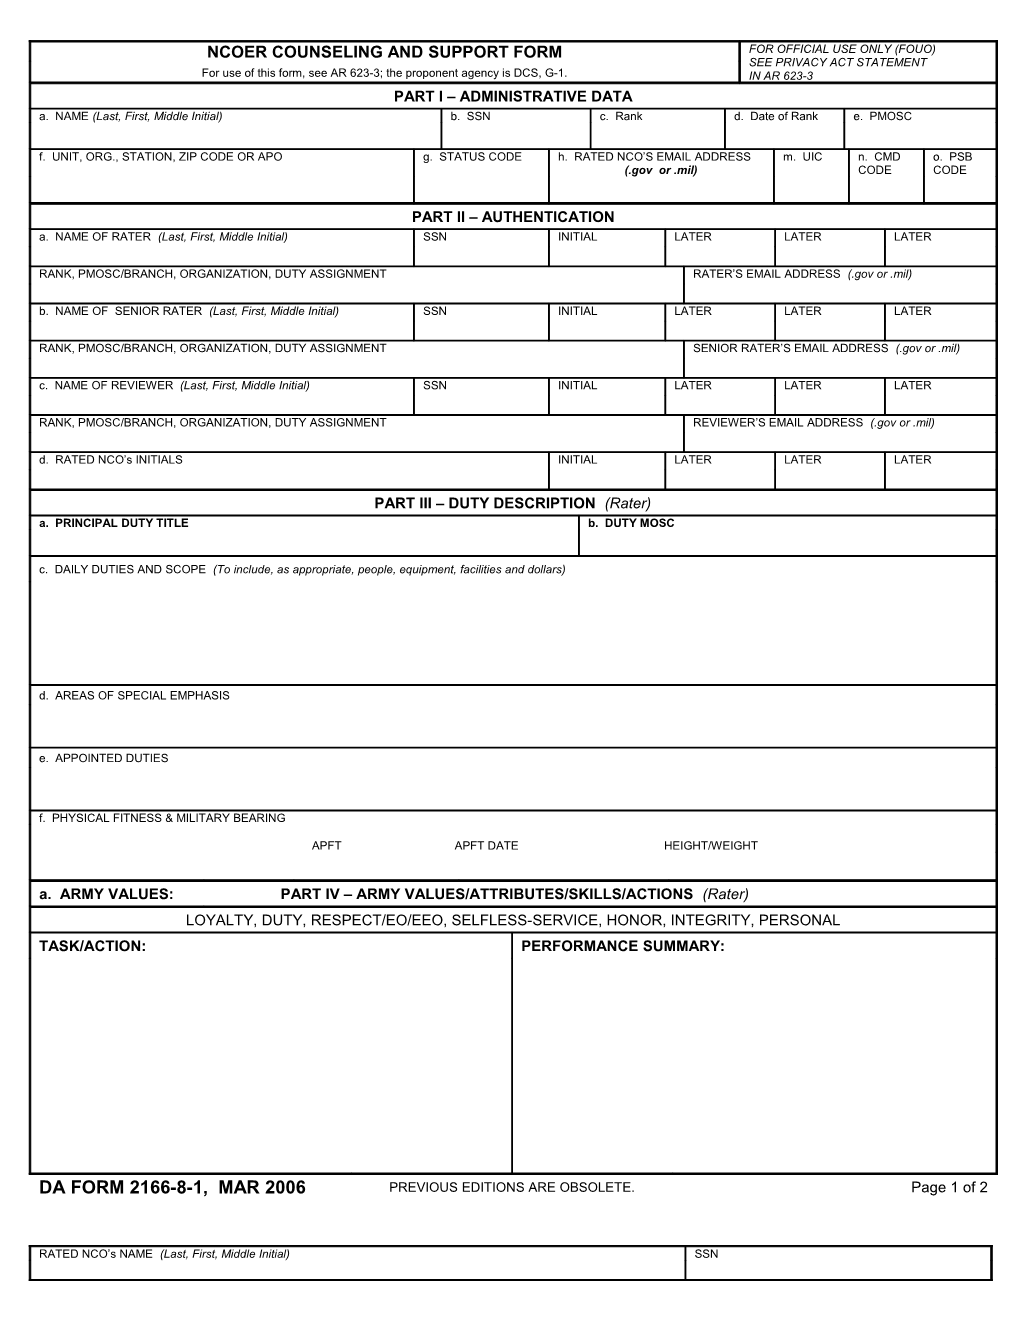 Ncoer Counseling and Support Form